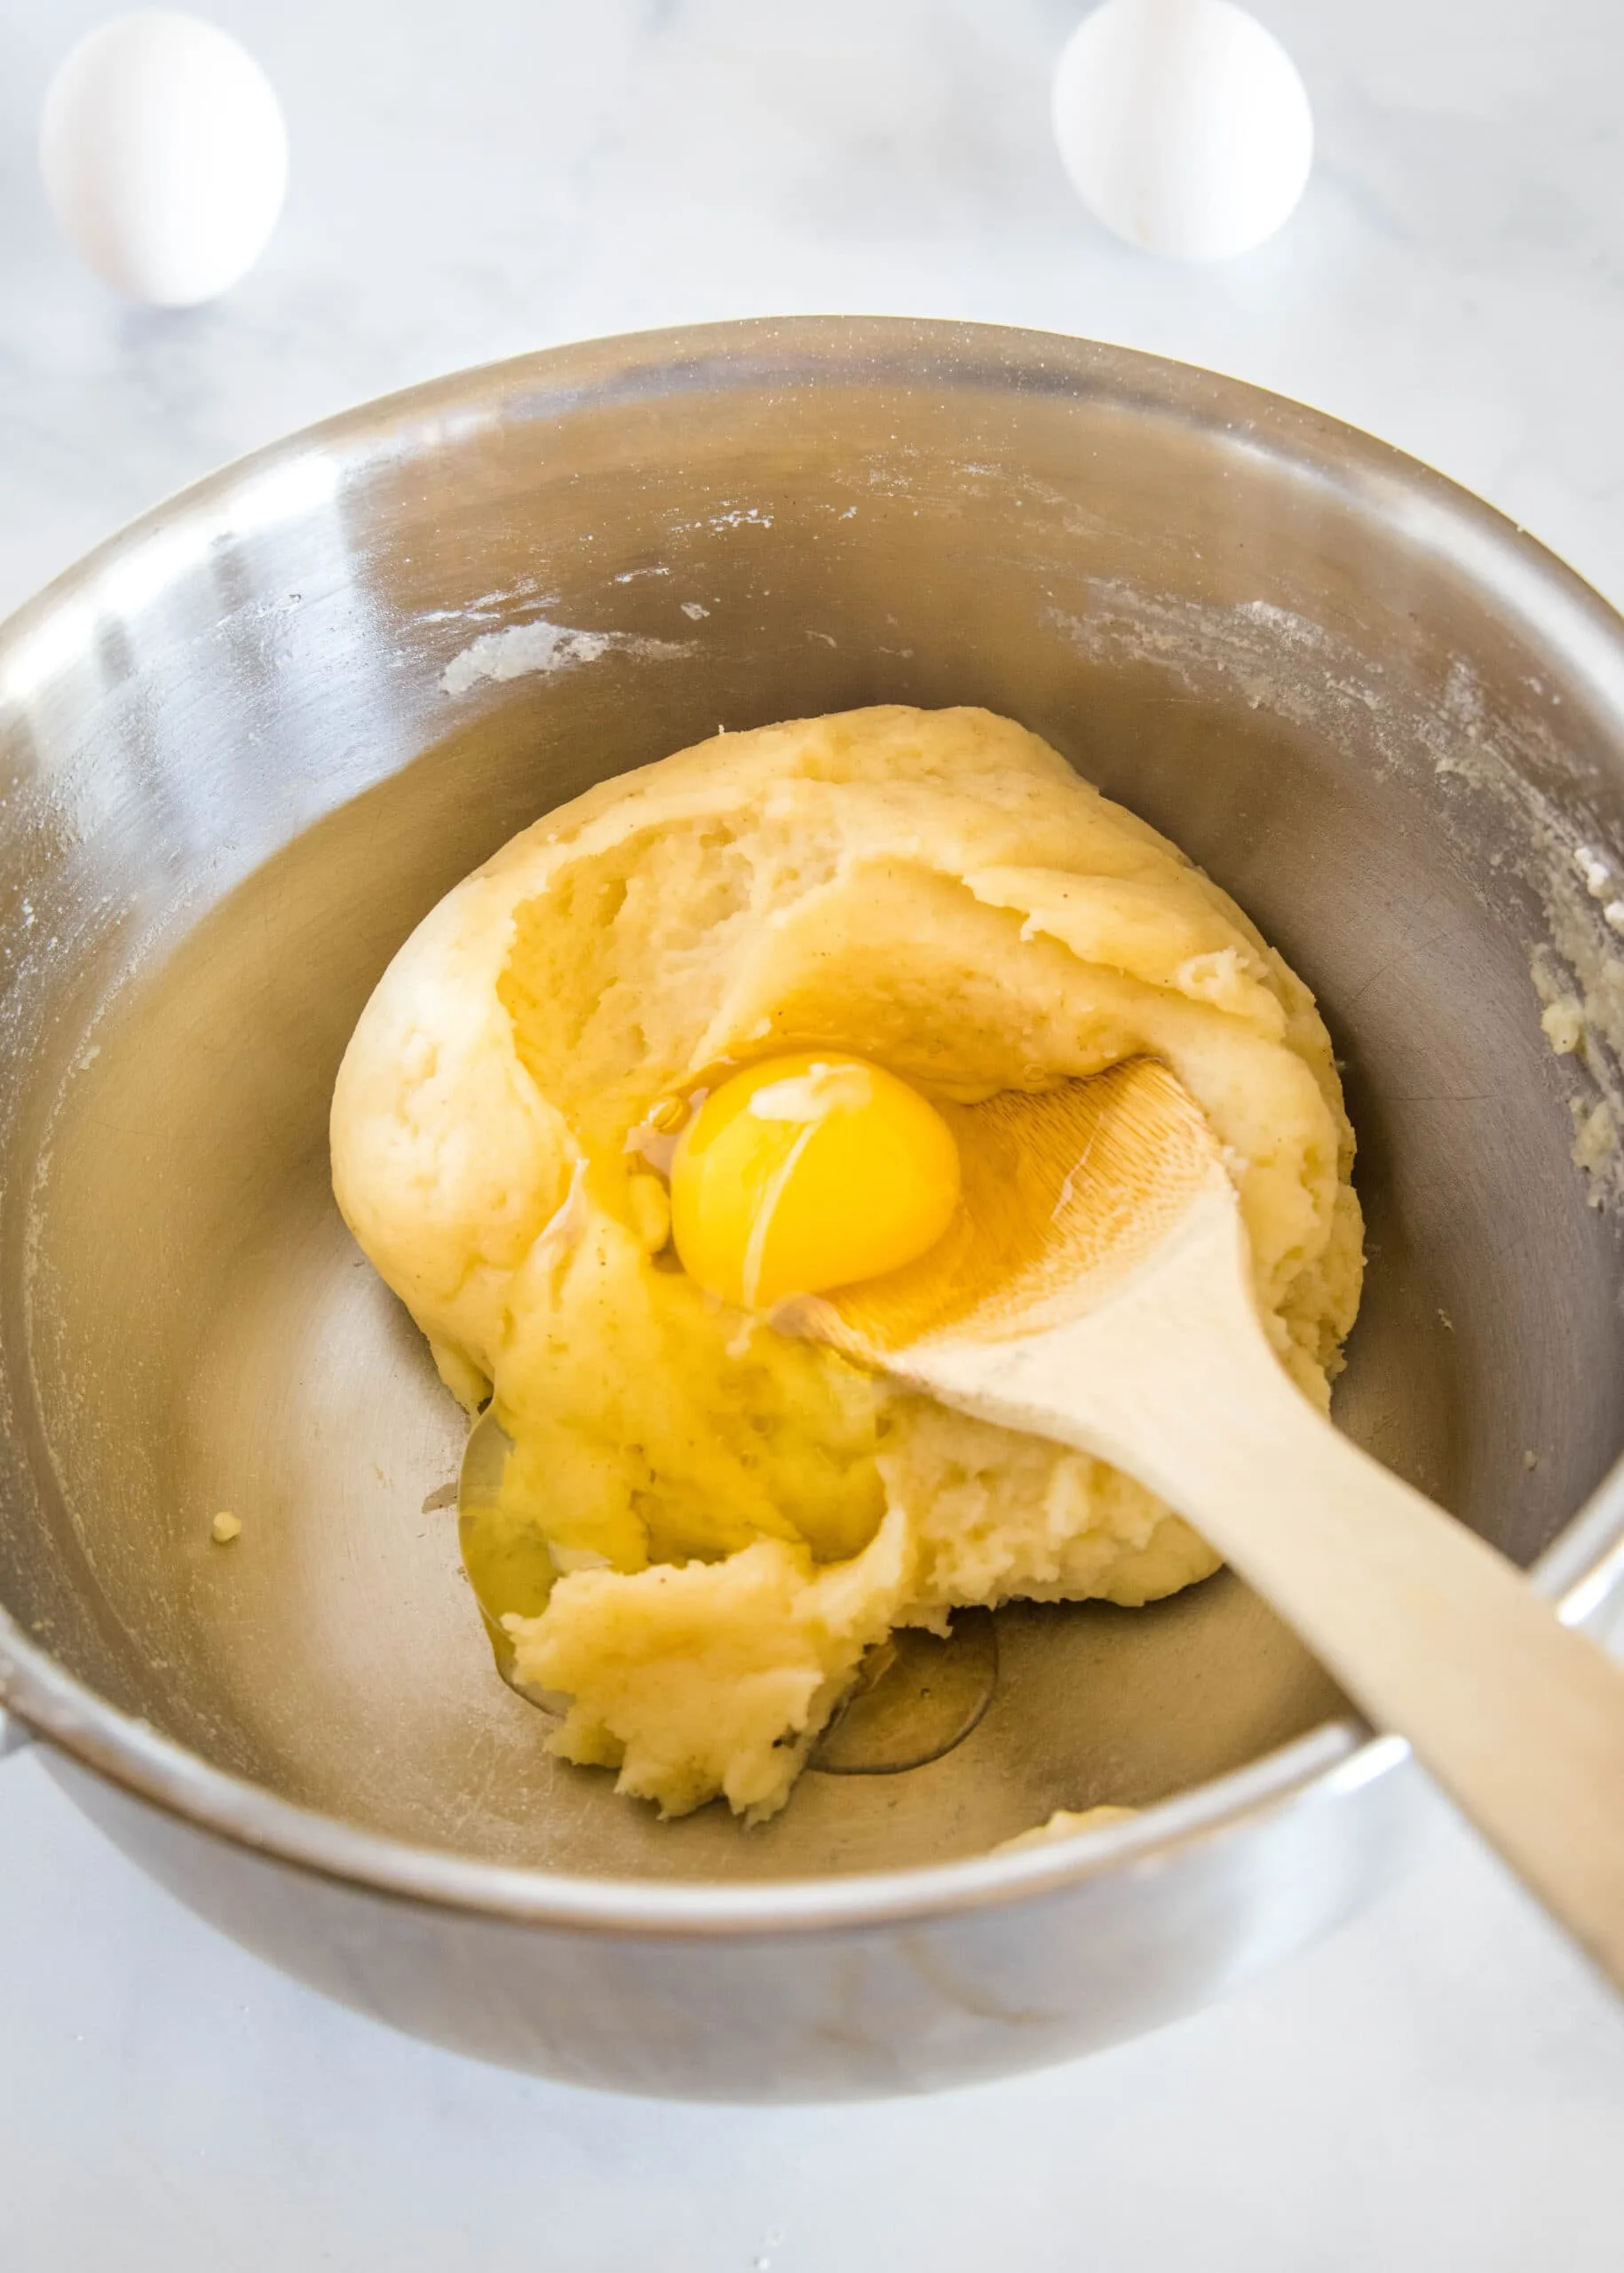 first egg being added to batter